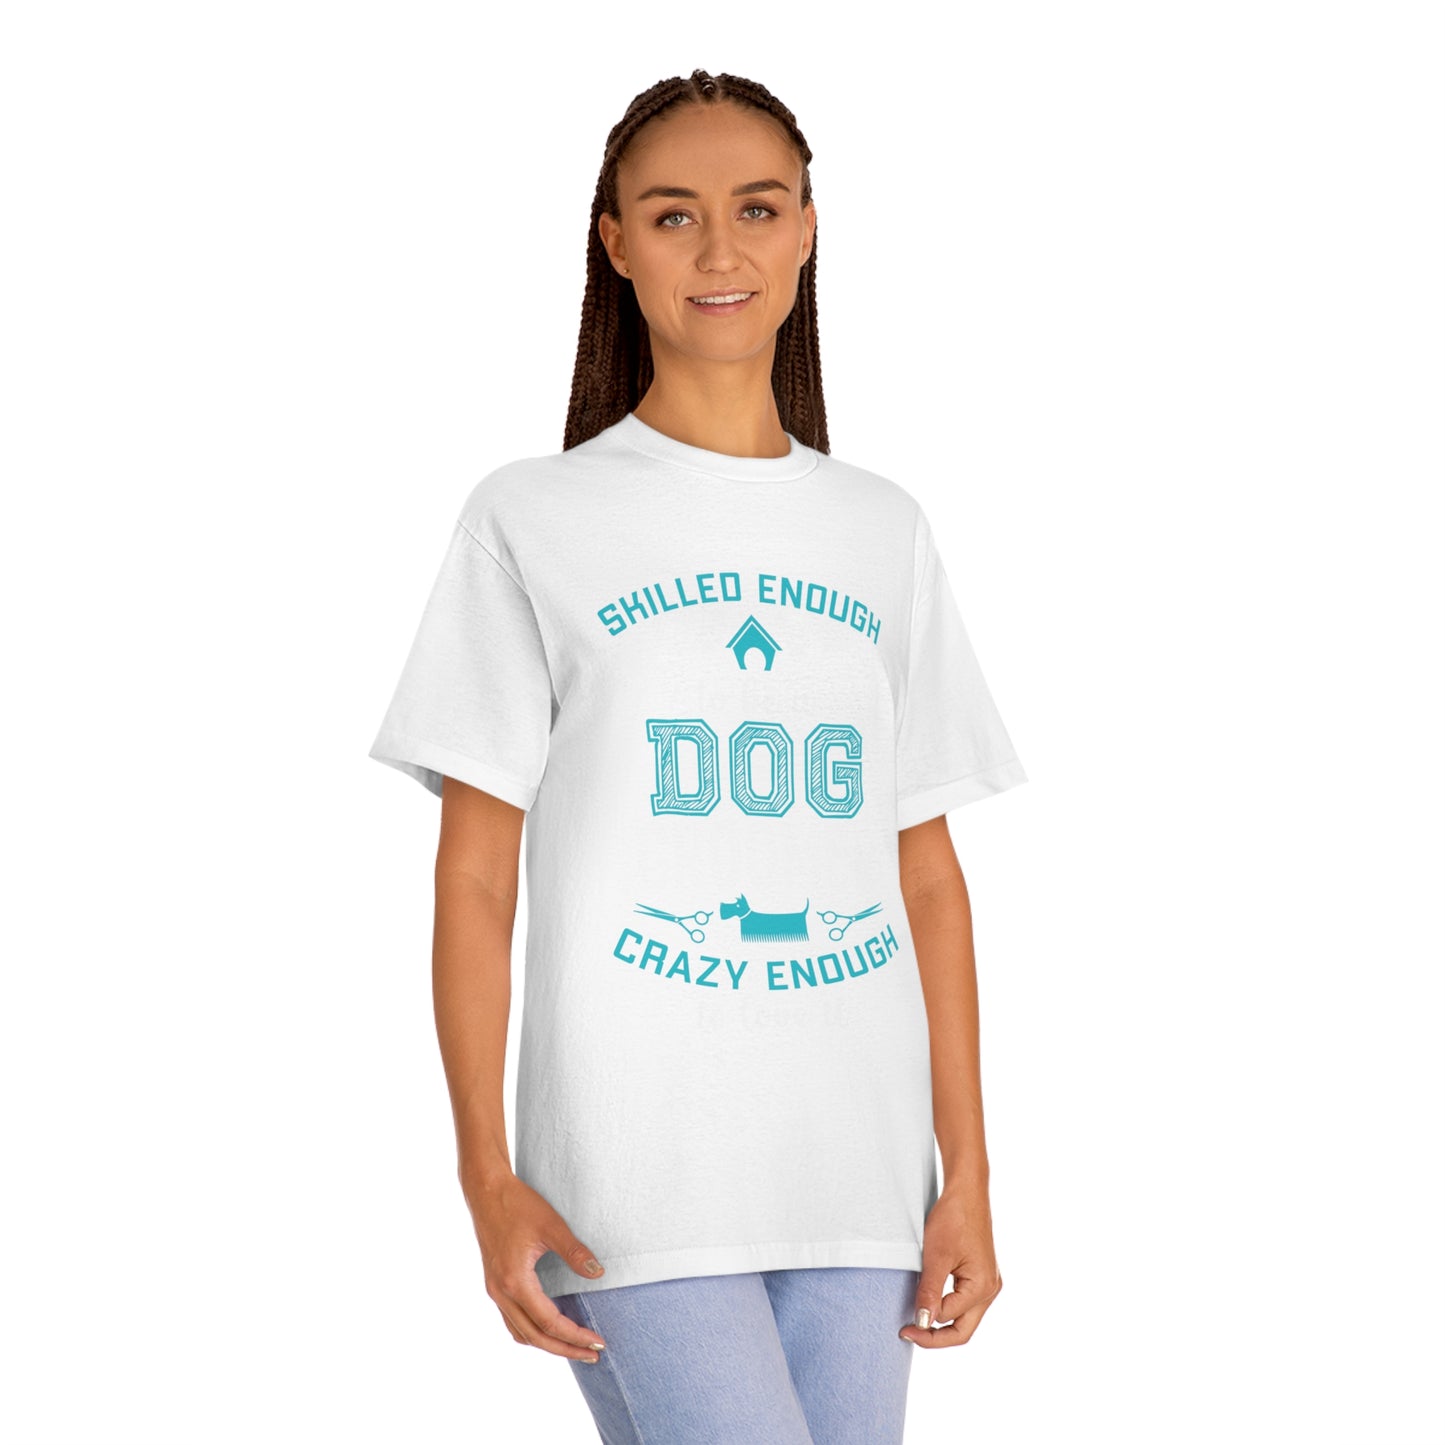 Skilled enough to be a dog groomer Unisex Classic Tee